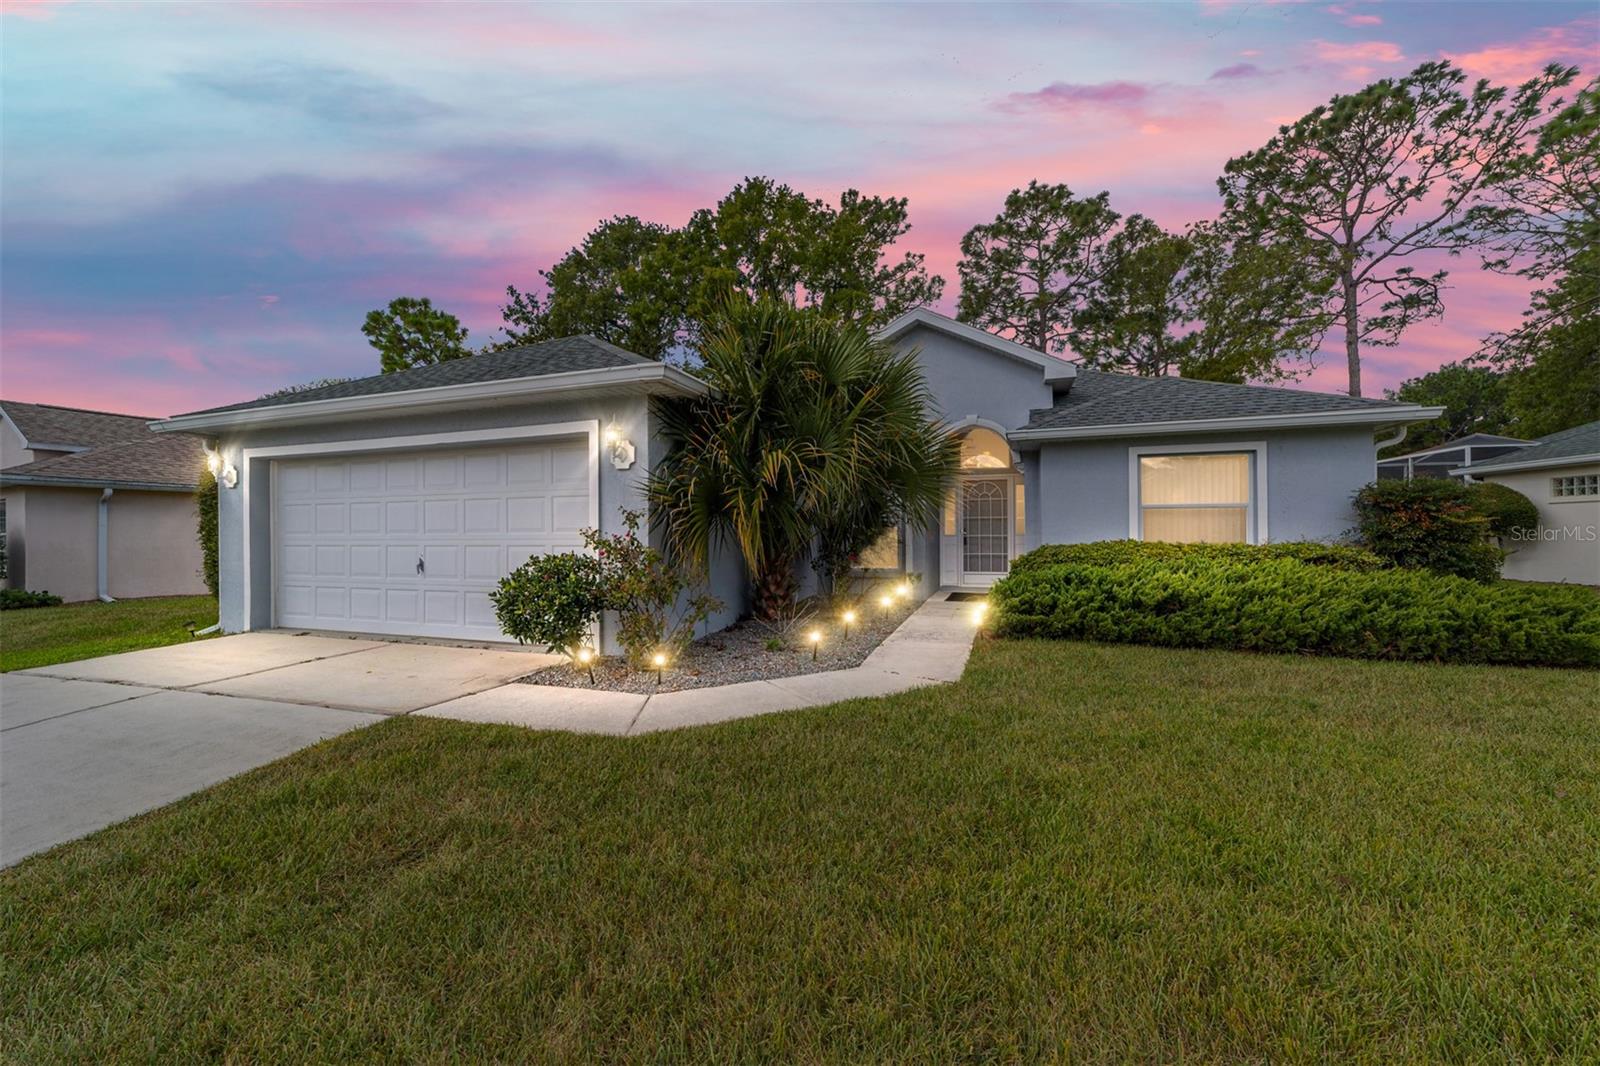 Details for 11434 69th Circle, OCALA, FL 34476